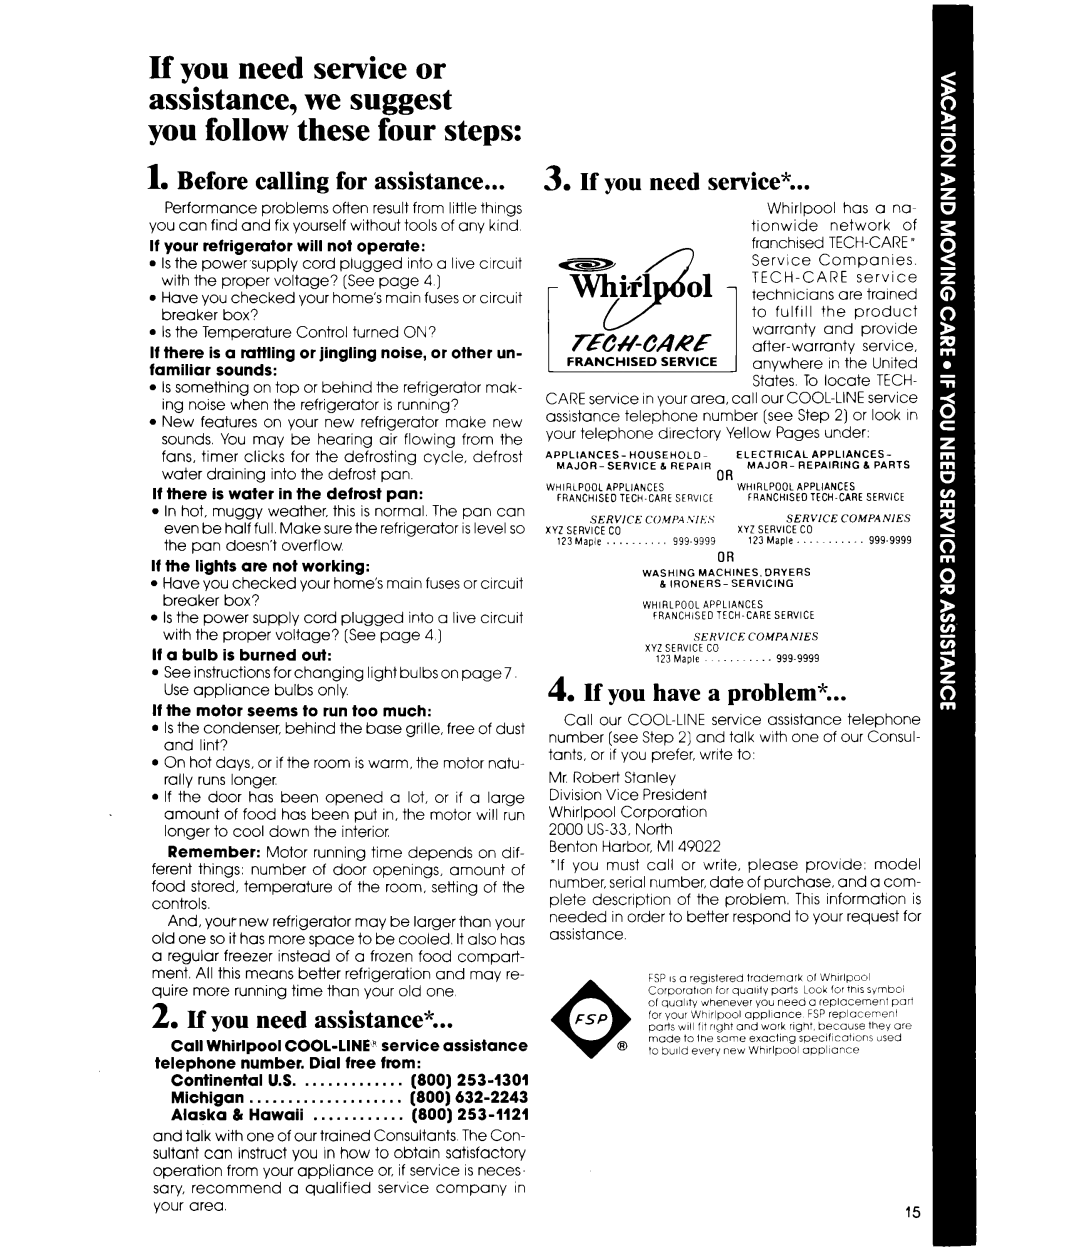 Whirlpool EDISSC manual Before calling for assistance, If you need assistance, of you need service, If you have a problem 